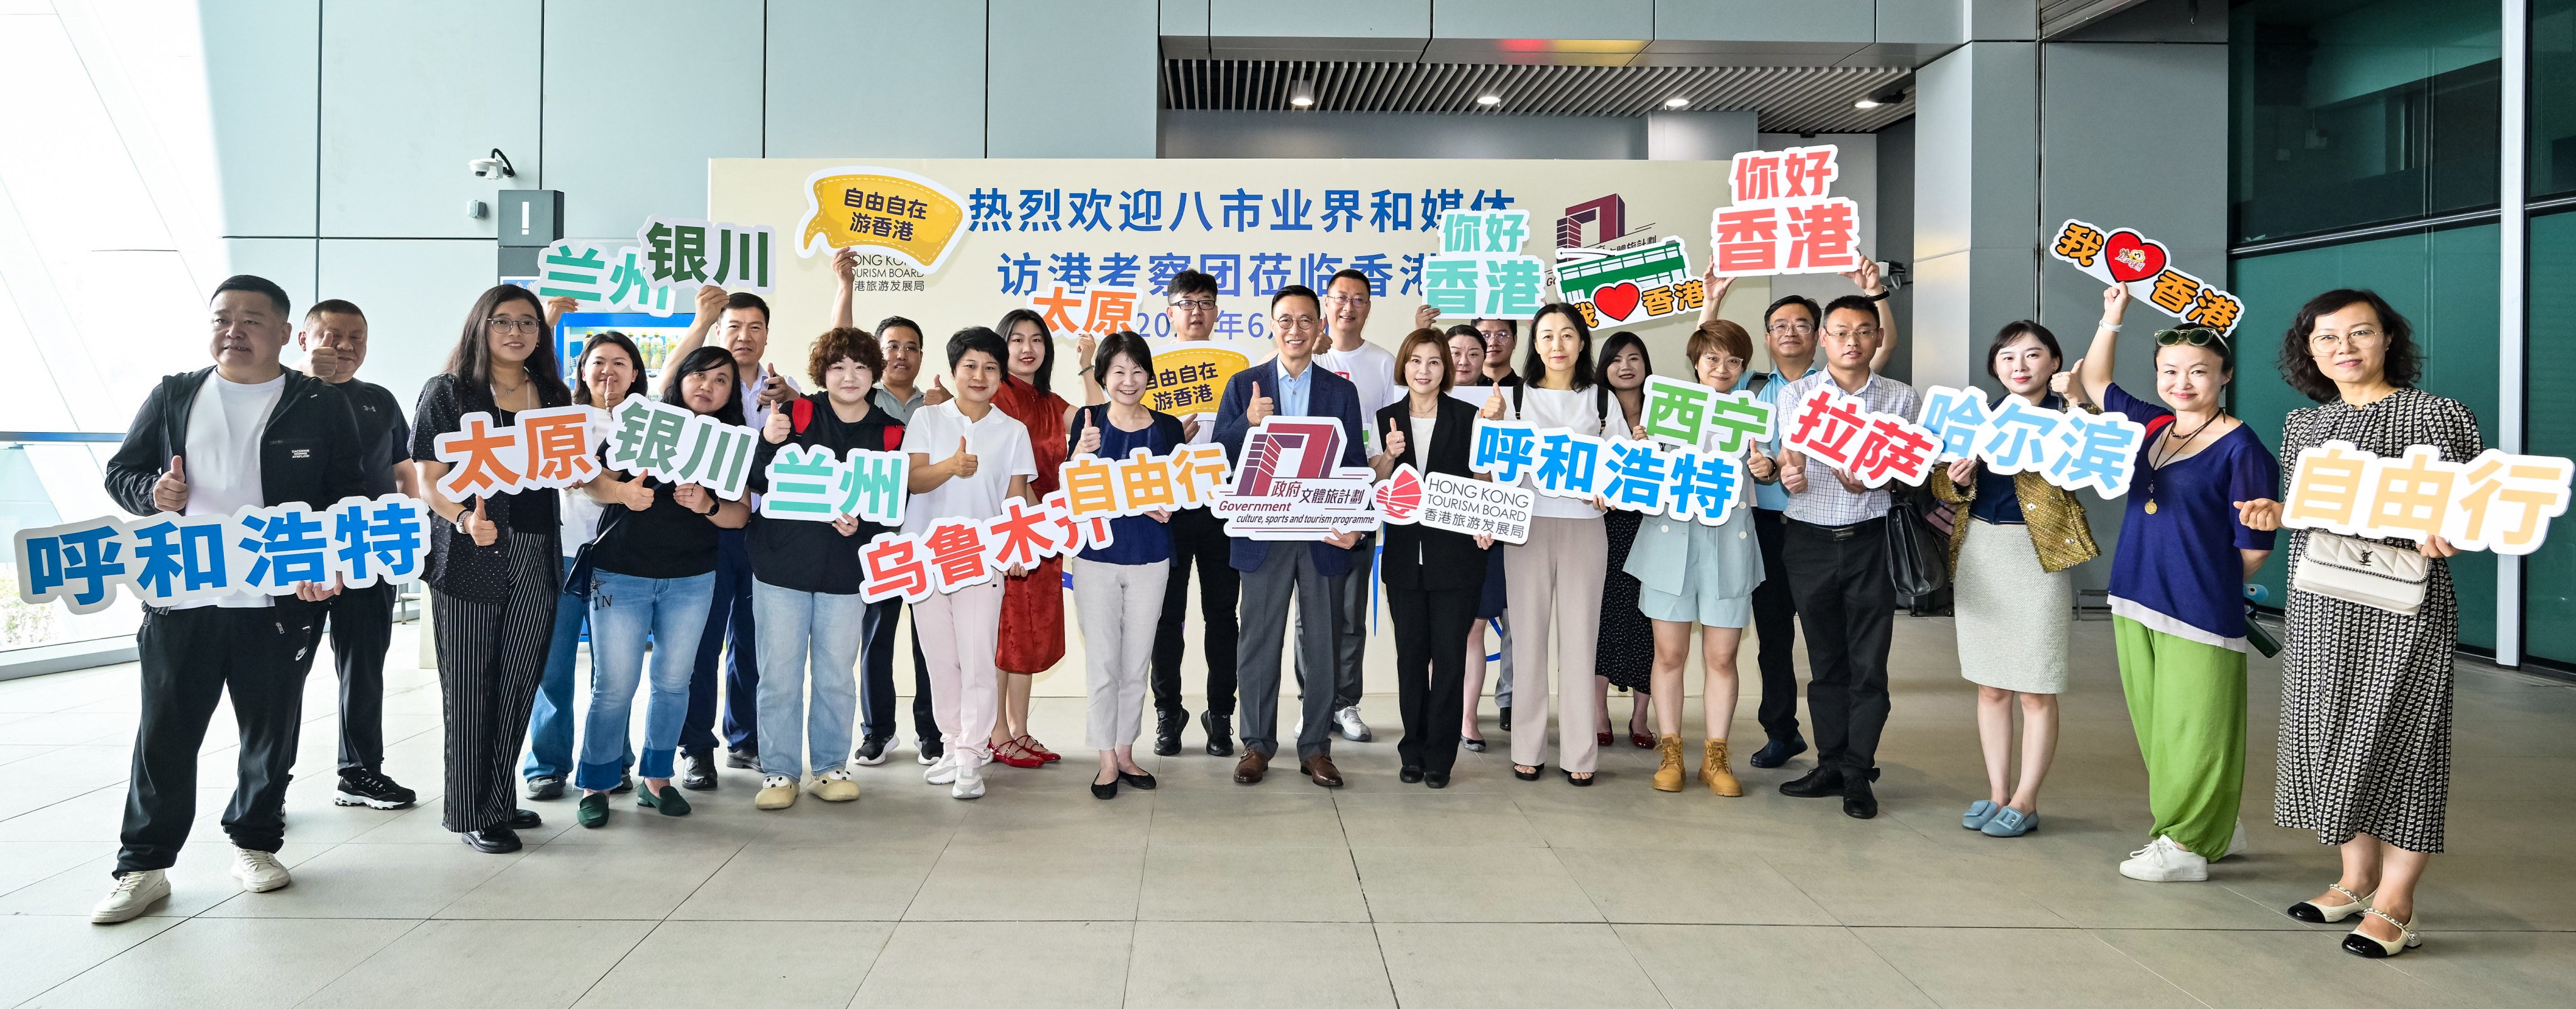 Tourism minister Kevin Yeung (centre) welcomes industry representatives and media from eight mainland cities at the Tourism Board visitor centre located at Heung Yuen Wai Boundary Control Point. Photo: ISD handout. 